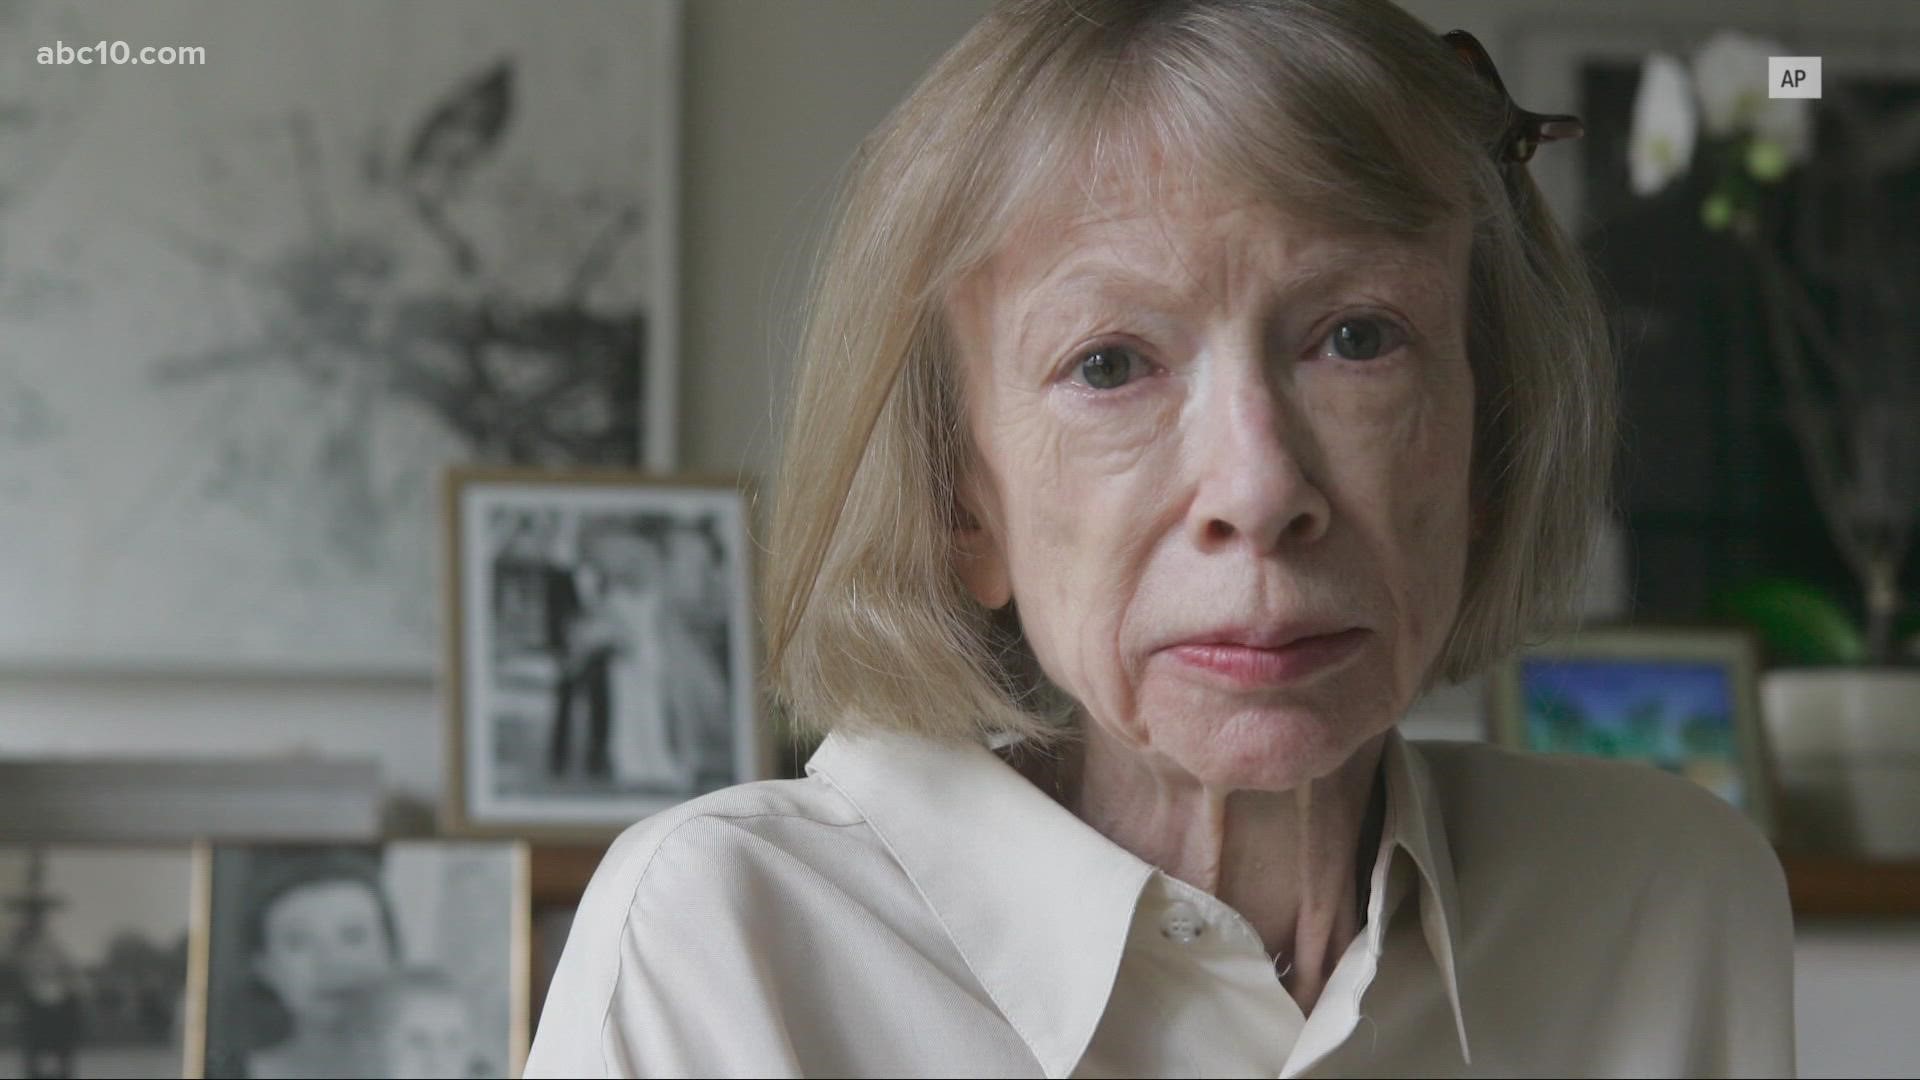 Joan Didion, the revered author and essayist who wrote: “The Year of Magical Thinking” has passed away at age 87.